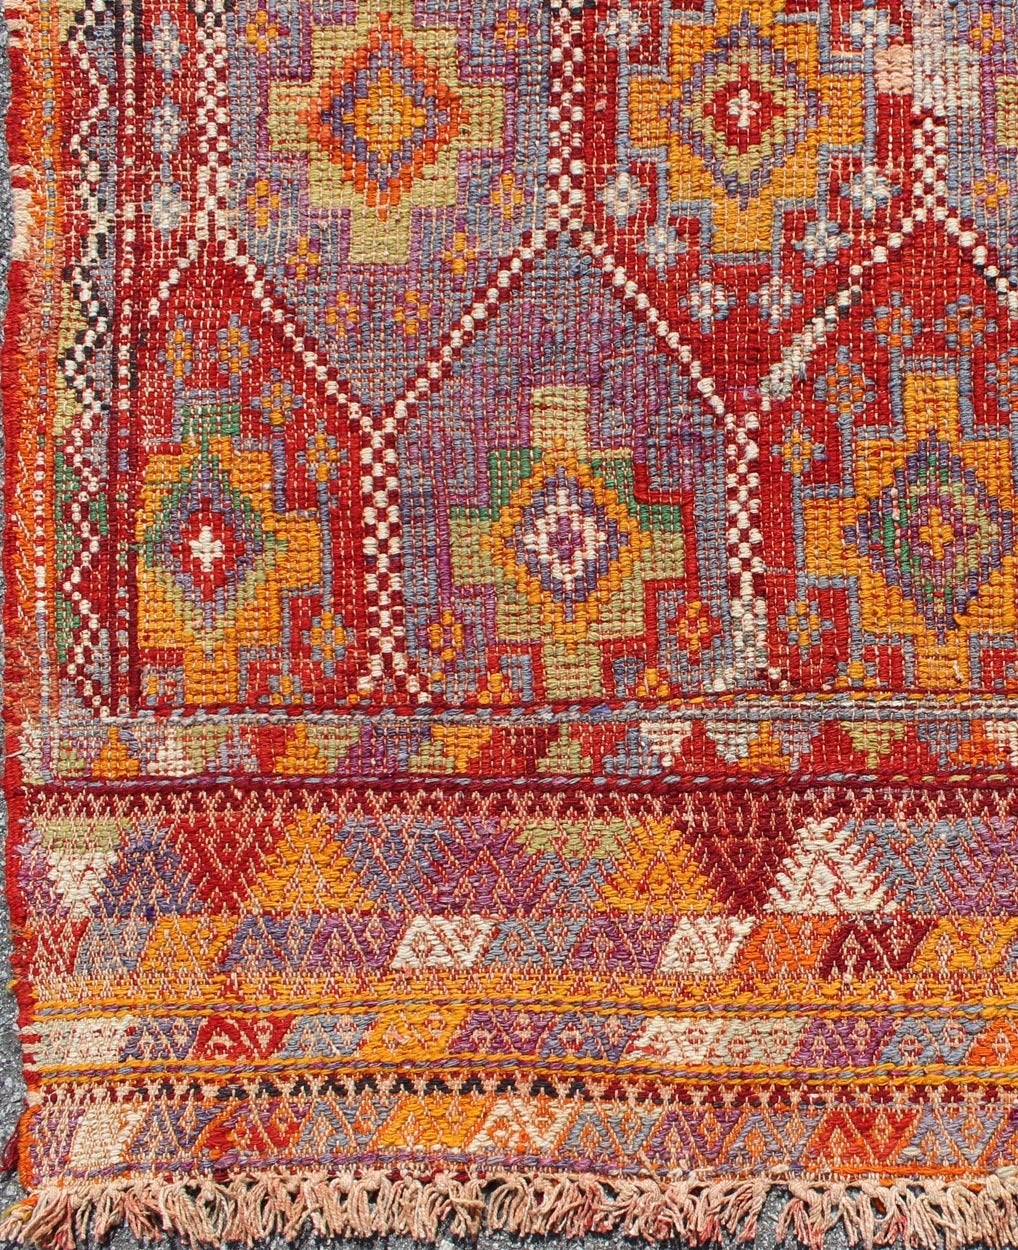 Vintage Embroidered Flat Weave Jajeem Jijim Rug with Geometric Diamond Design.
Rendered in star shapes with a spotted and speckled assortment of geometric elements, this unique mid-century Jajeem showcases an array of rich colorful tones that have